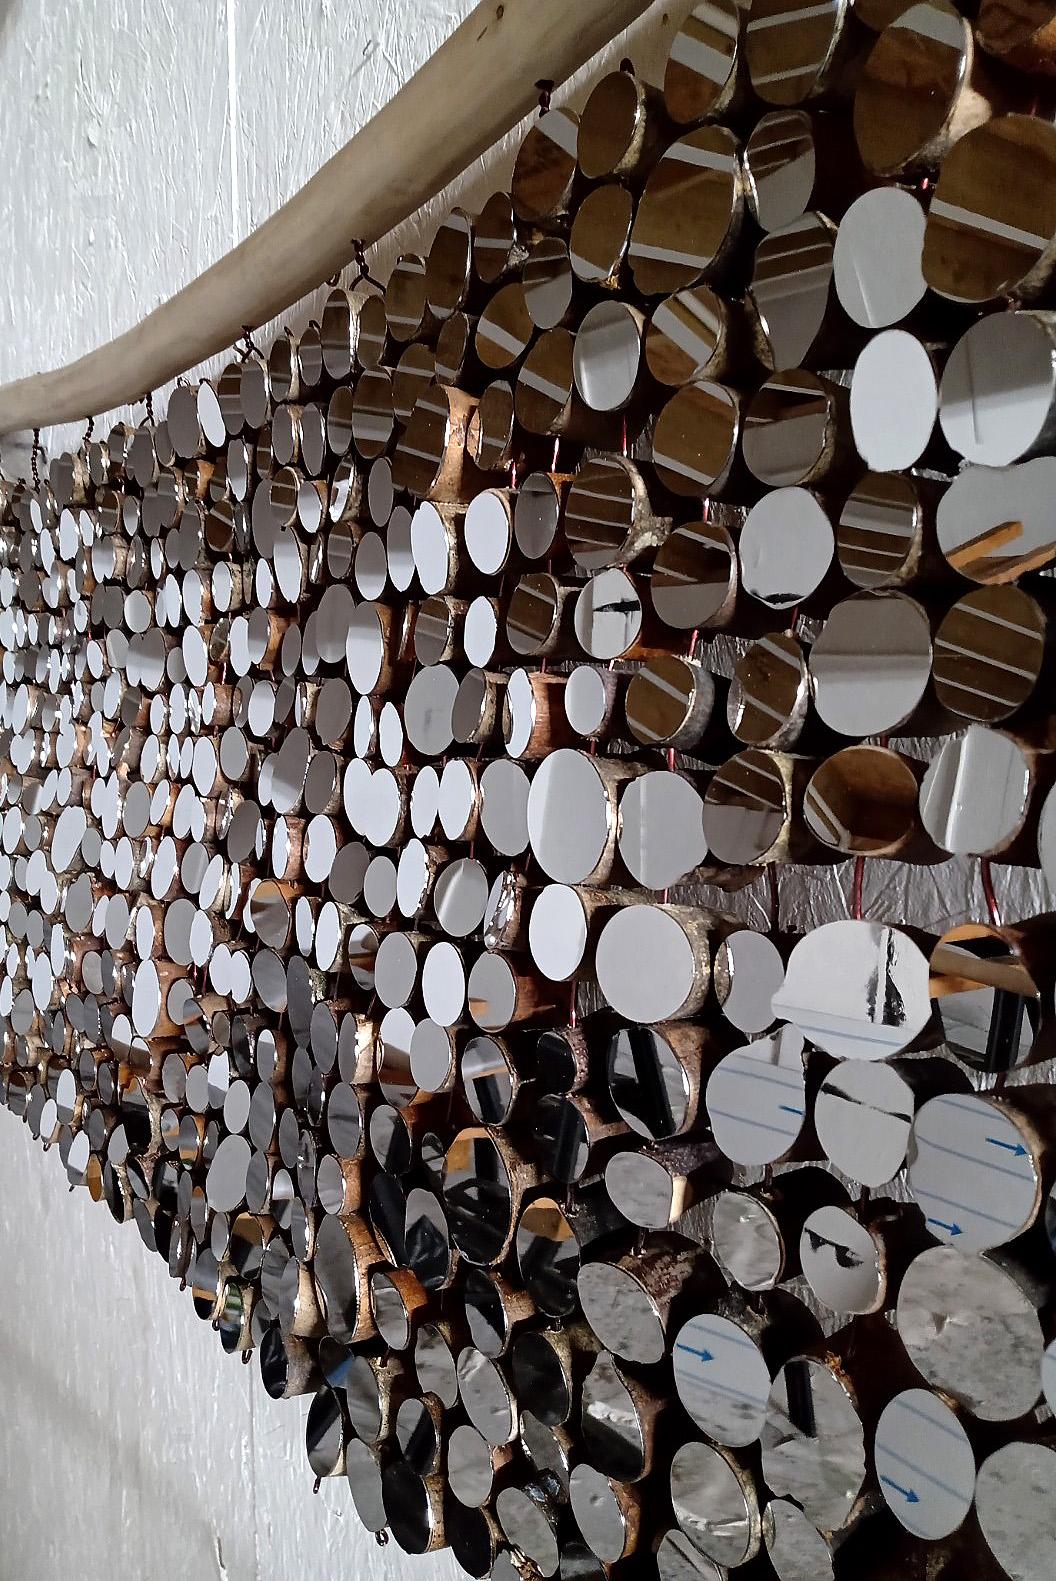 Landscape Mirror Tapestry 2: Sculptural Wall Hanging of Mirrors and Fallen Wood - Sculpture by Lee Borthwick